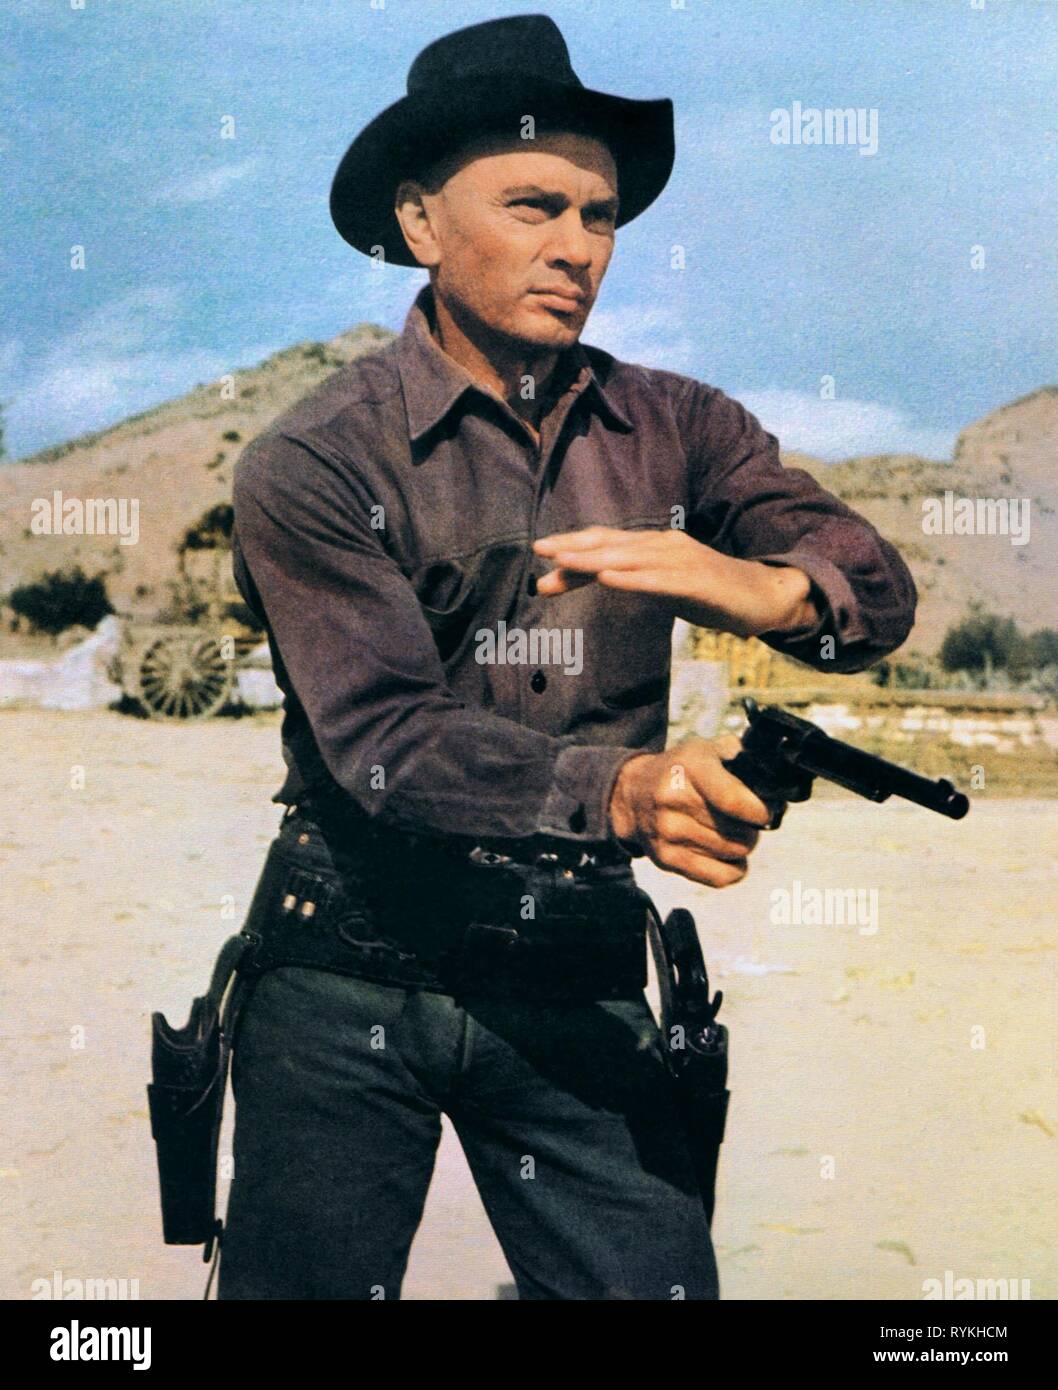 YUL BRYNNER, RETURN OF THE MAGNIFICENT 7, 1966 Stock Photo